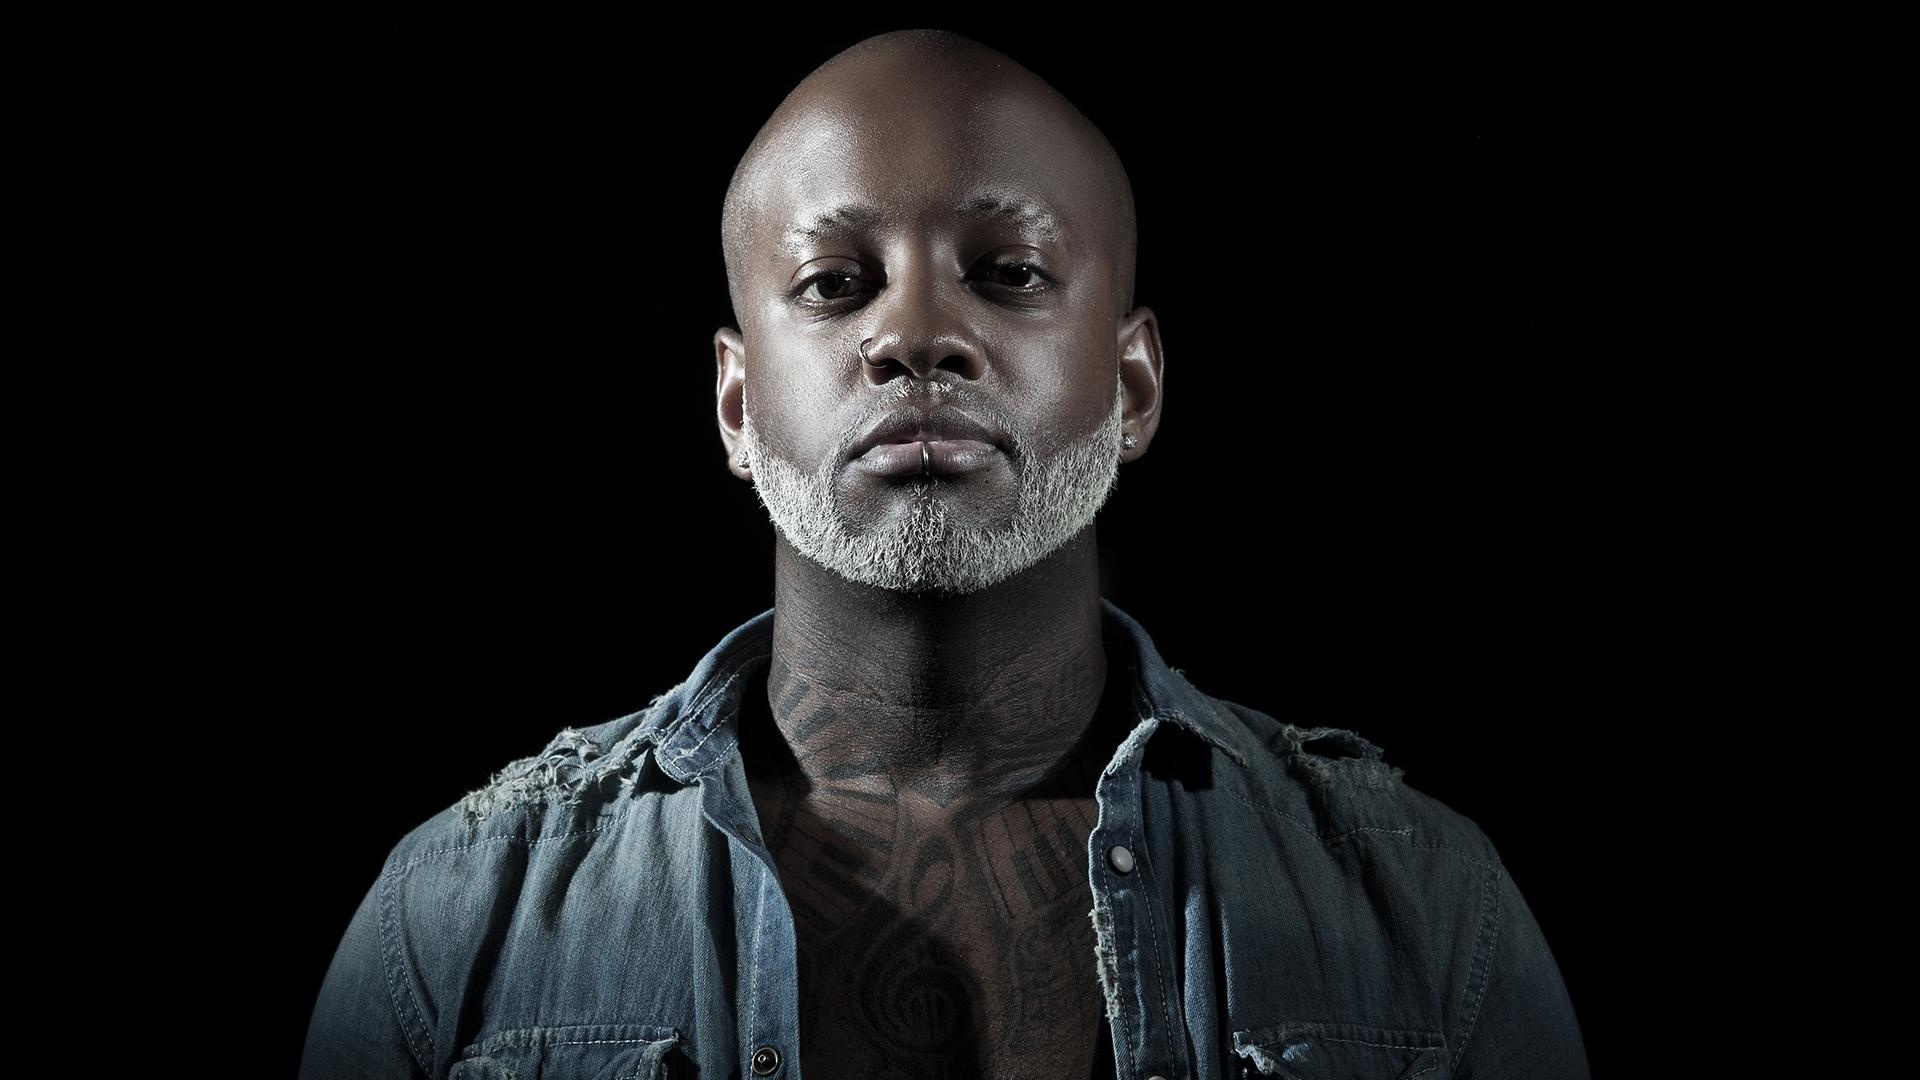 Willy William, French music, Ego song, Free download, 1920x1080 Full HD Desktop